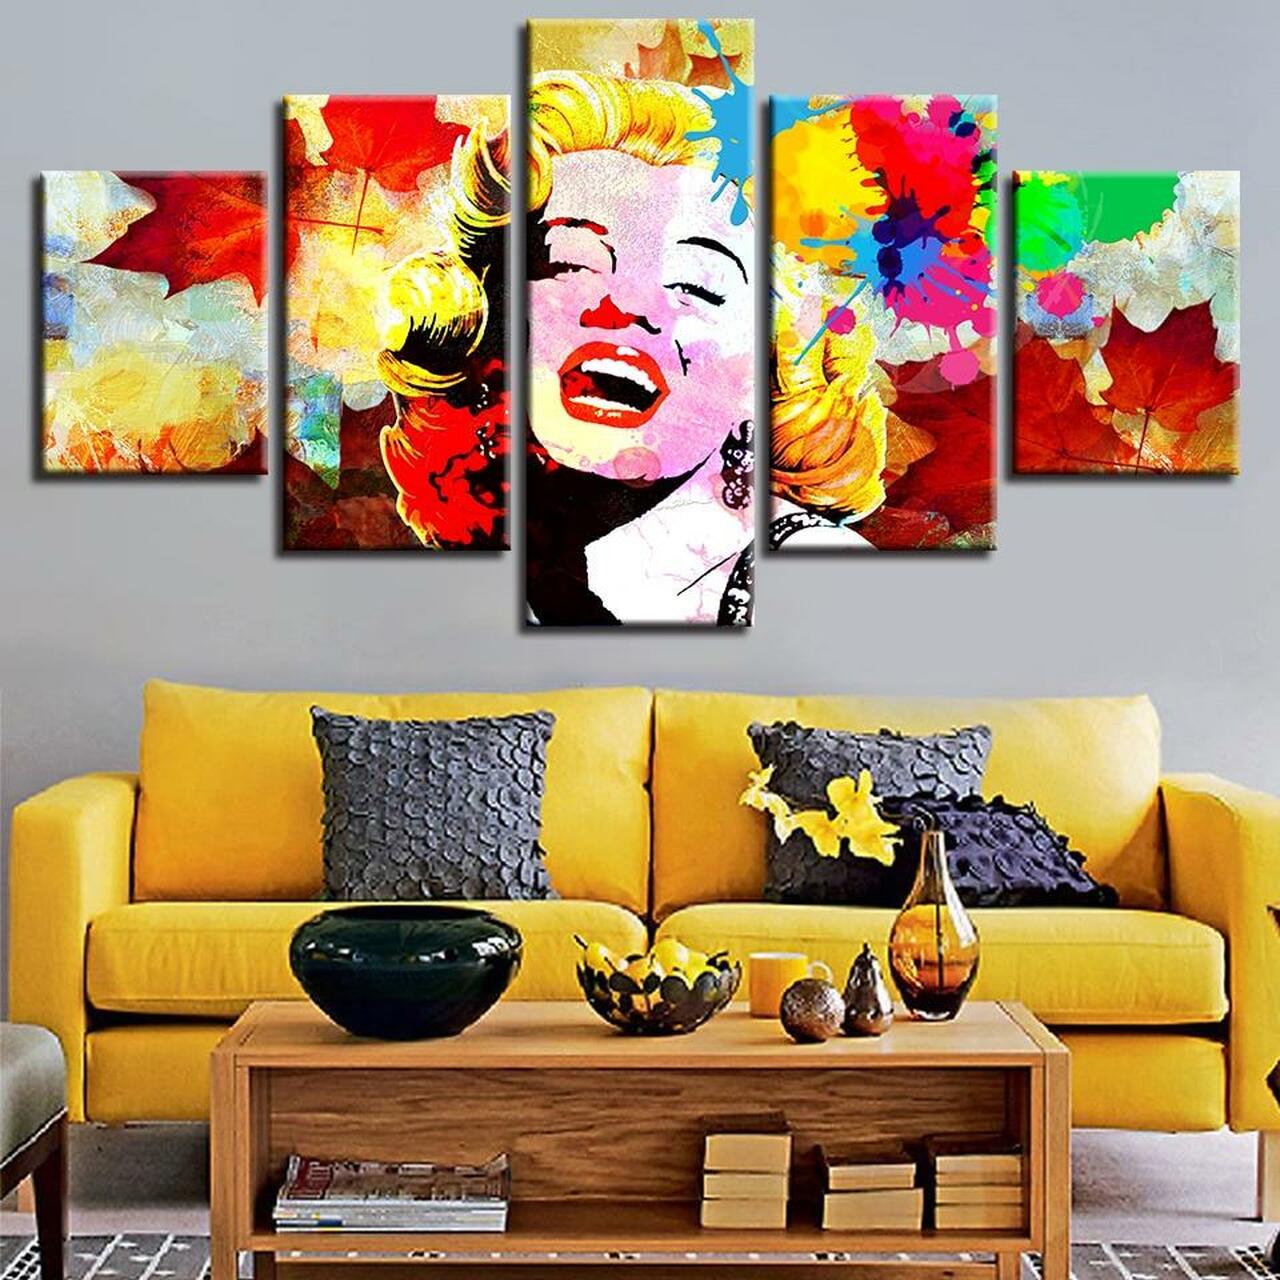 Marilyn in Colors 5 Piece Canvas Art Wall Decor